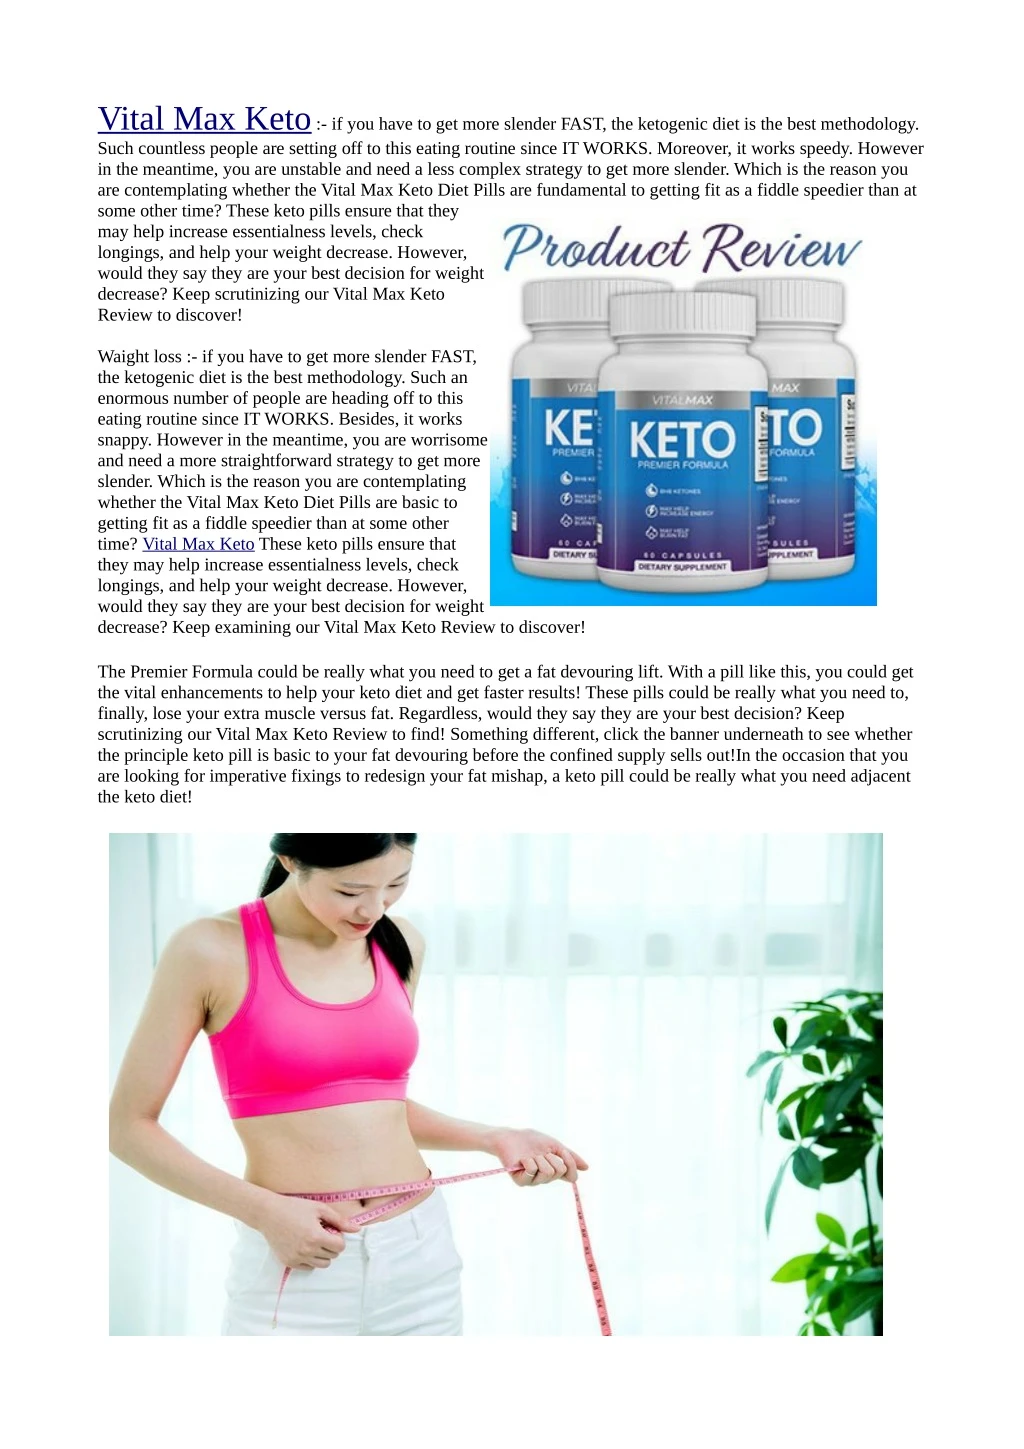 vital max keto if you have to get more slender